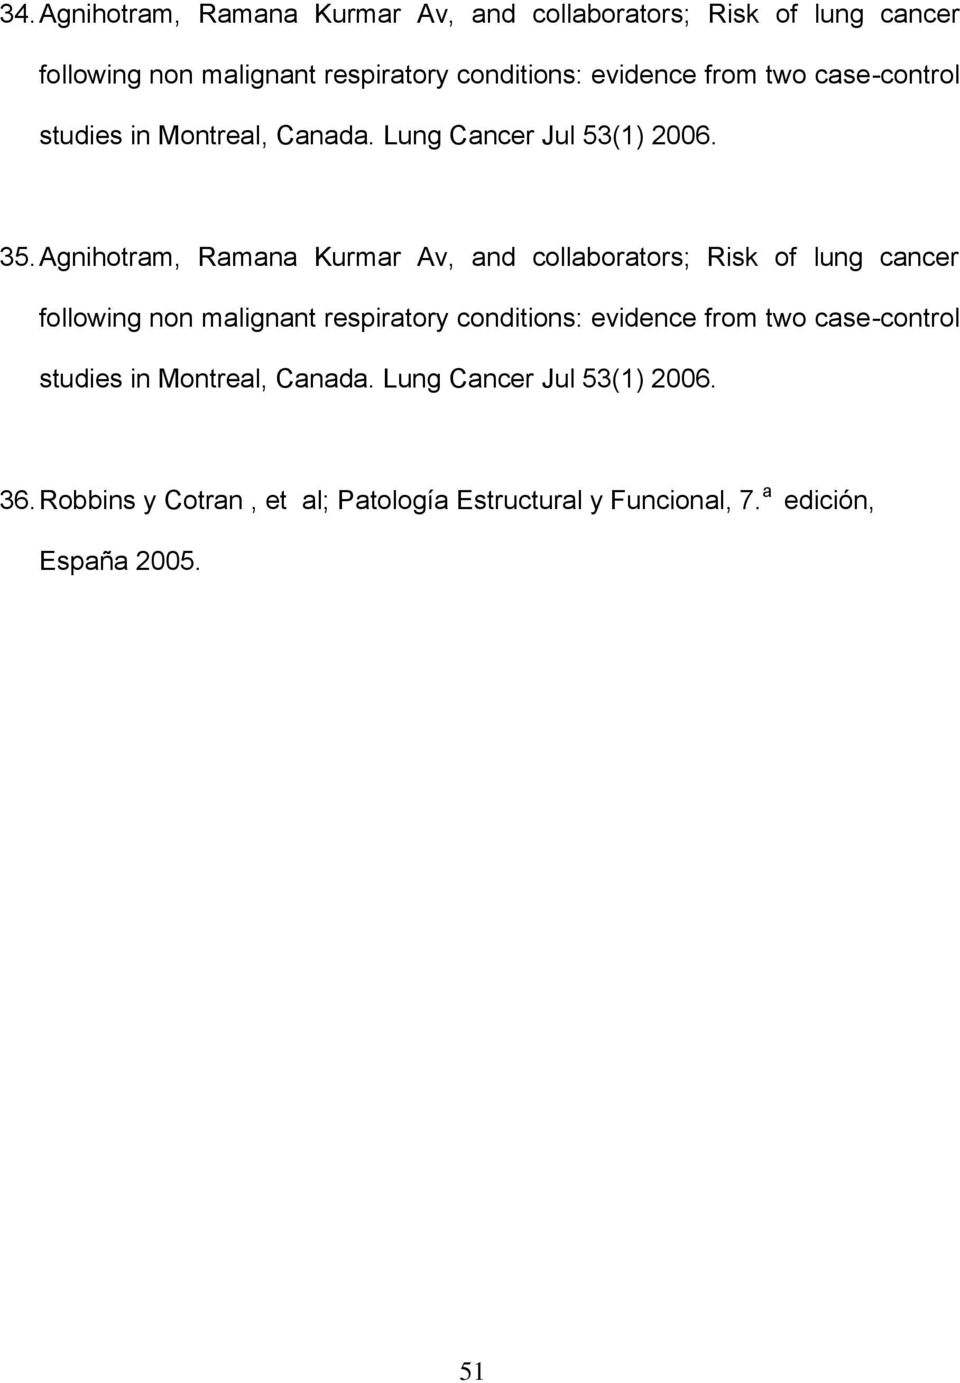 Agnihotram, Ramana Kurmar Av, and collaborators; Risk of lung cancer following non malignant respiratory conditions: evidence